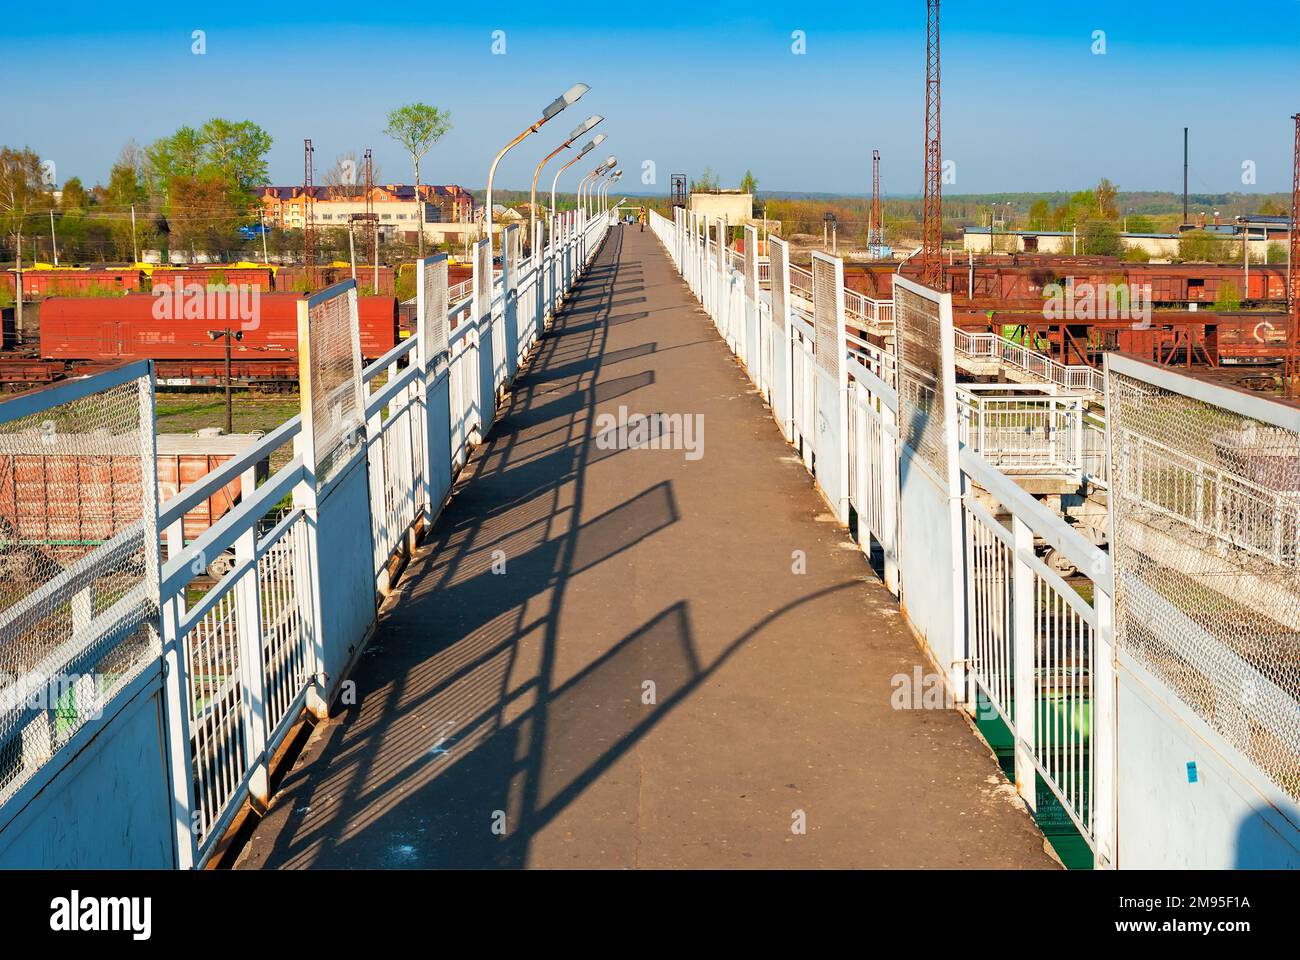 The city of the Necklace. Pedestrian bridge over the railway Stock Photo